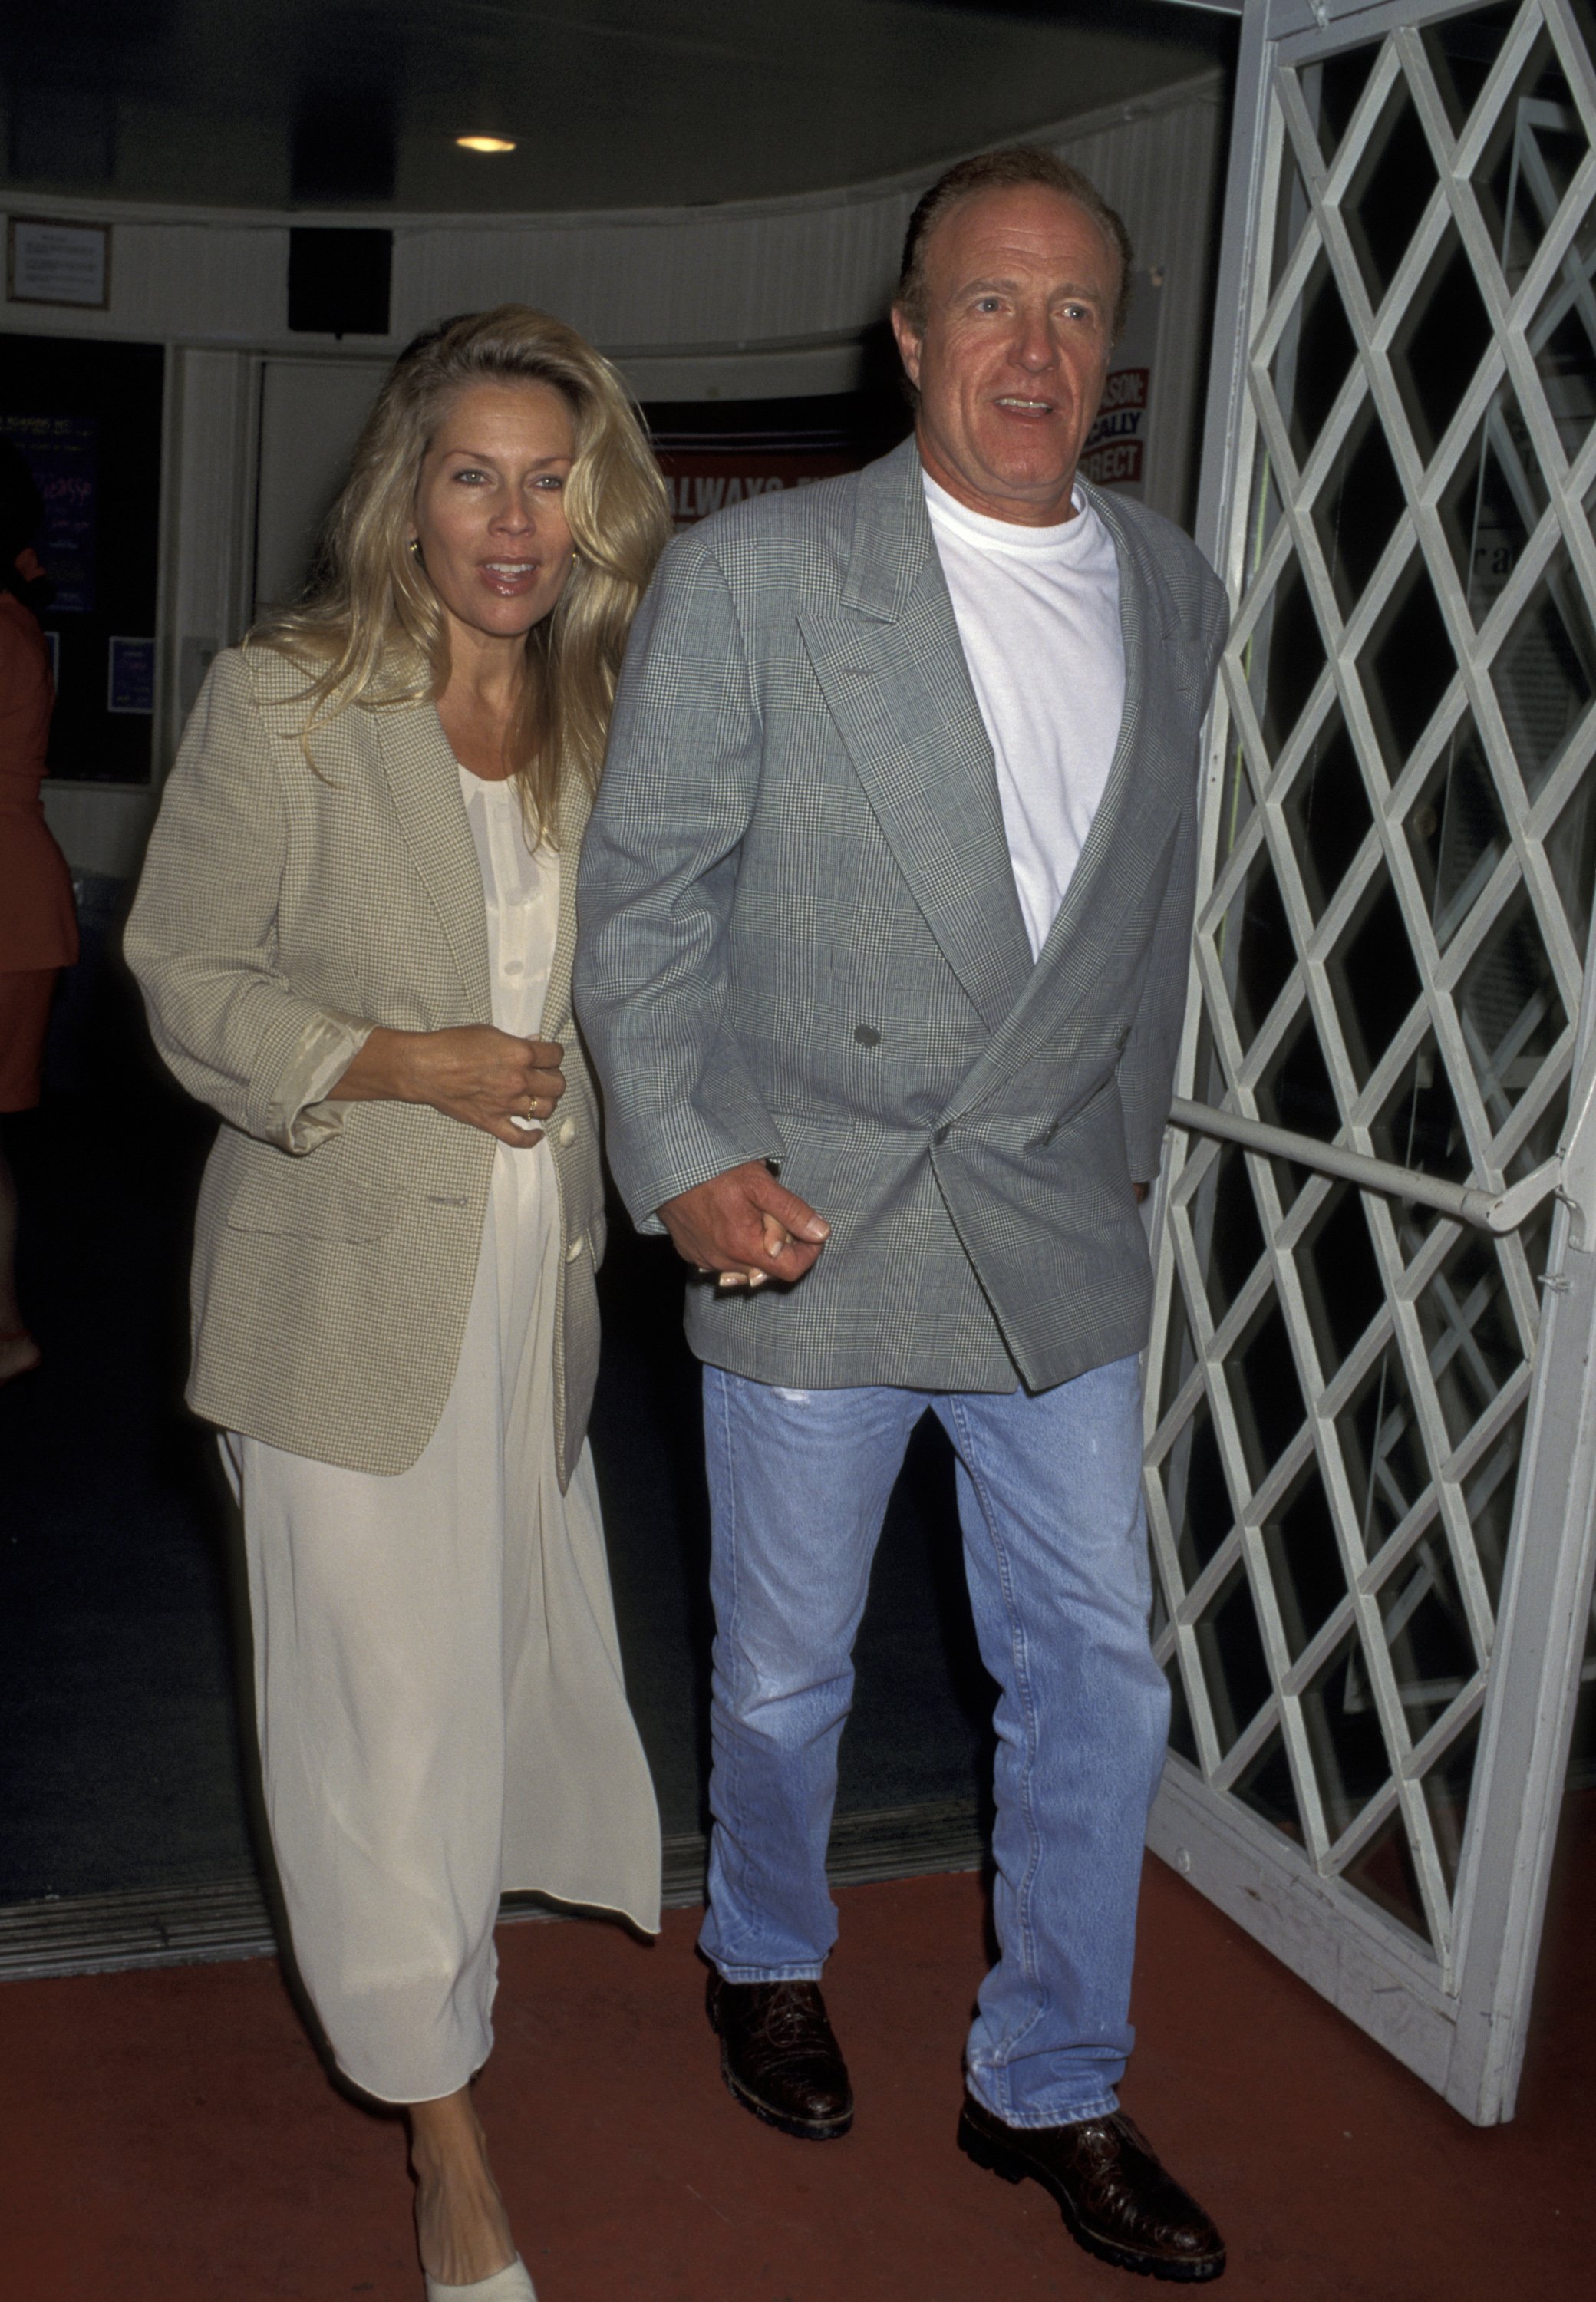 Linda Stokes and James Caan at the opening night of "Jackie Mason: Politically Incorrect" in Beverly Hills, California, on July 18, 1995. | Source: Getty Images